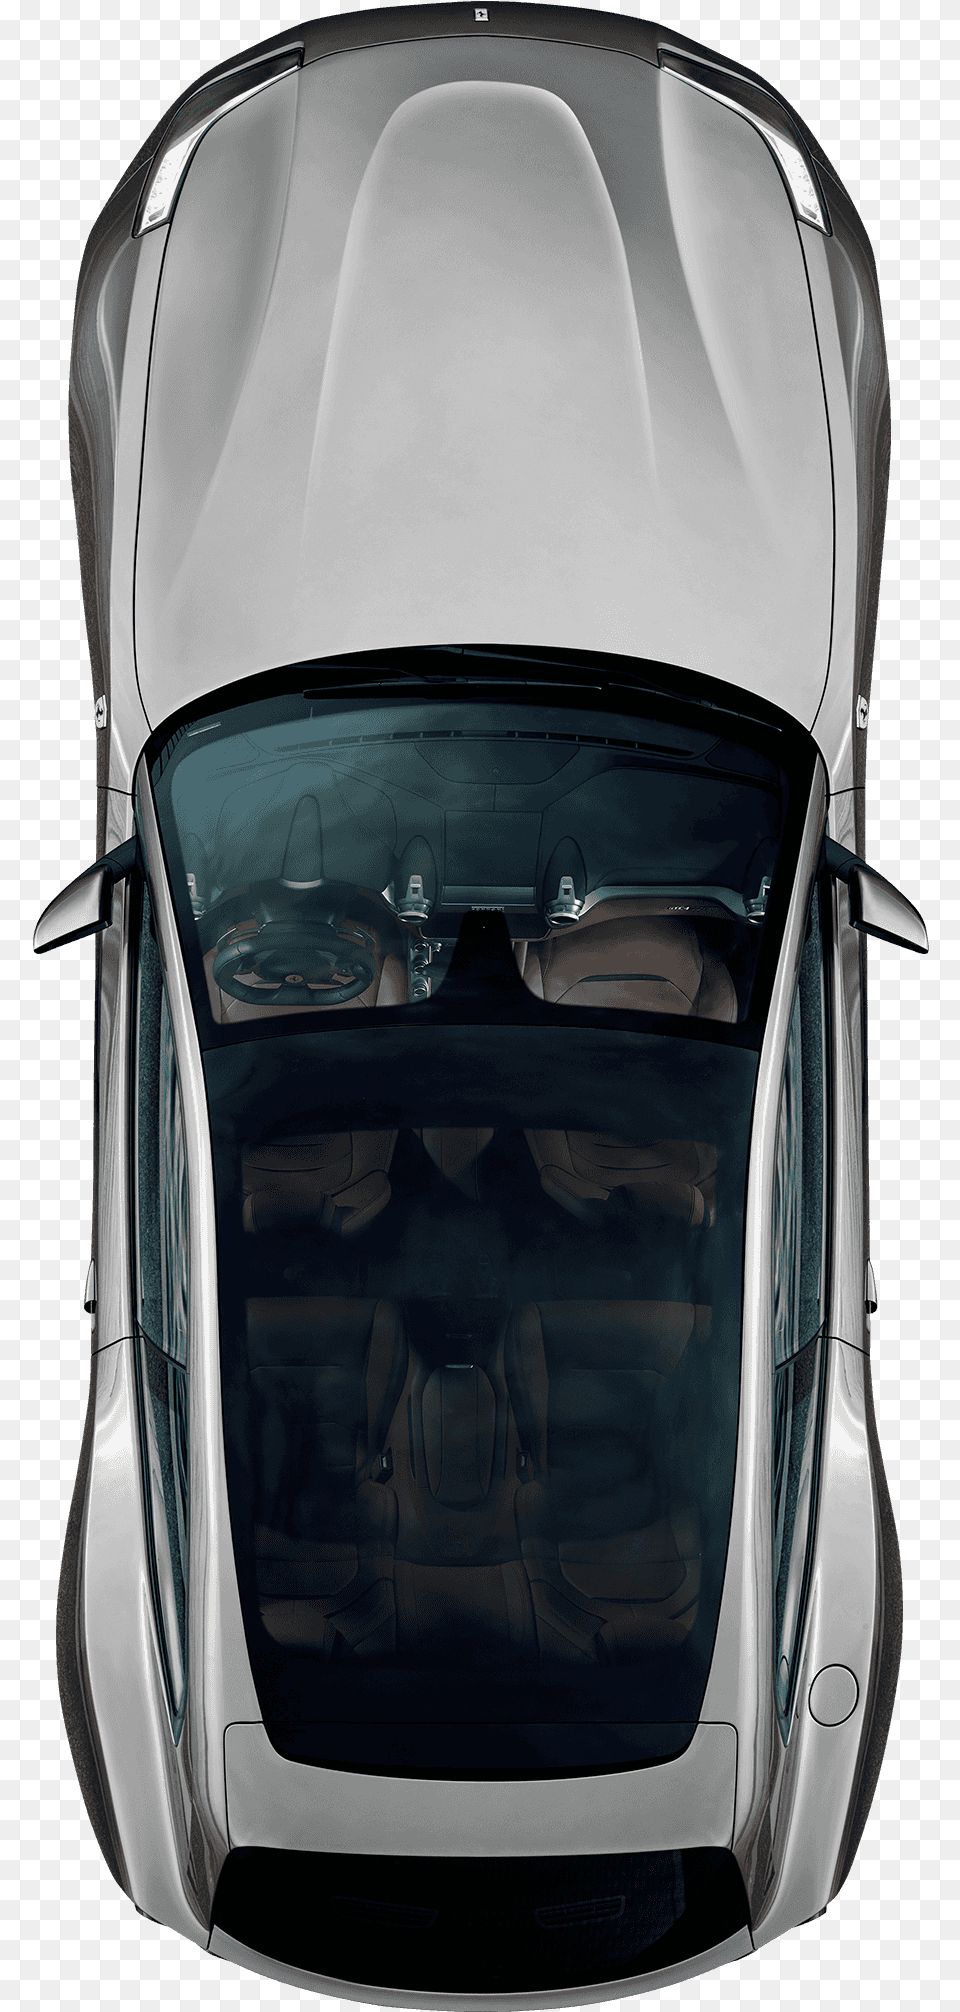 Car Top View Ferrari Animated Car Top View, Transportation, Vehicle, Windshield, Cushion Png